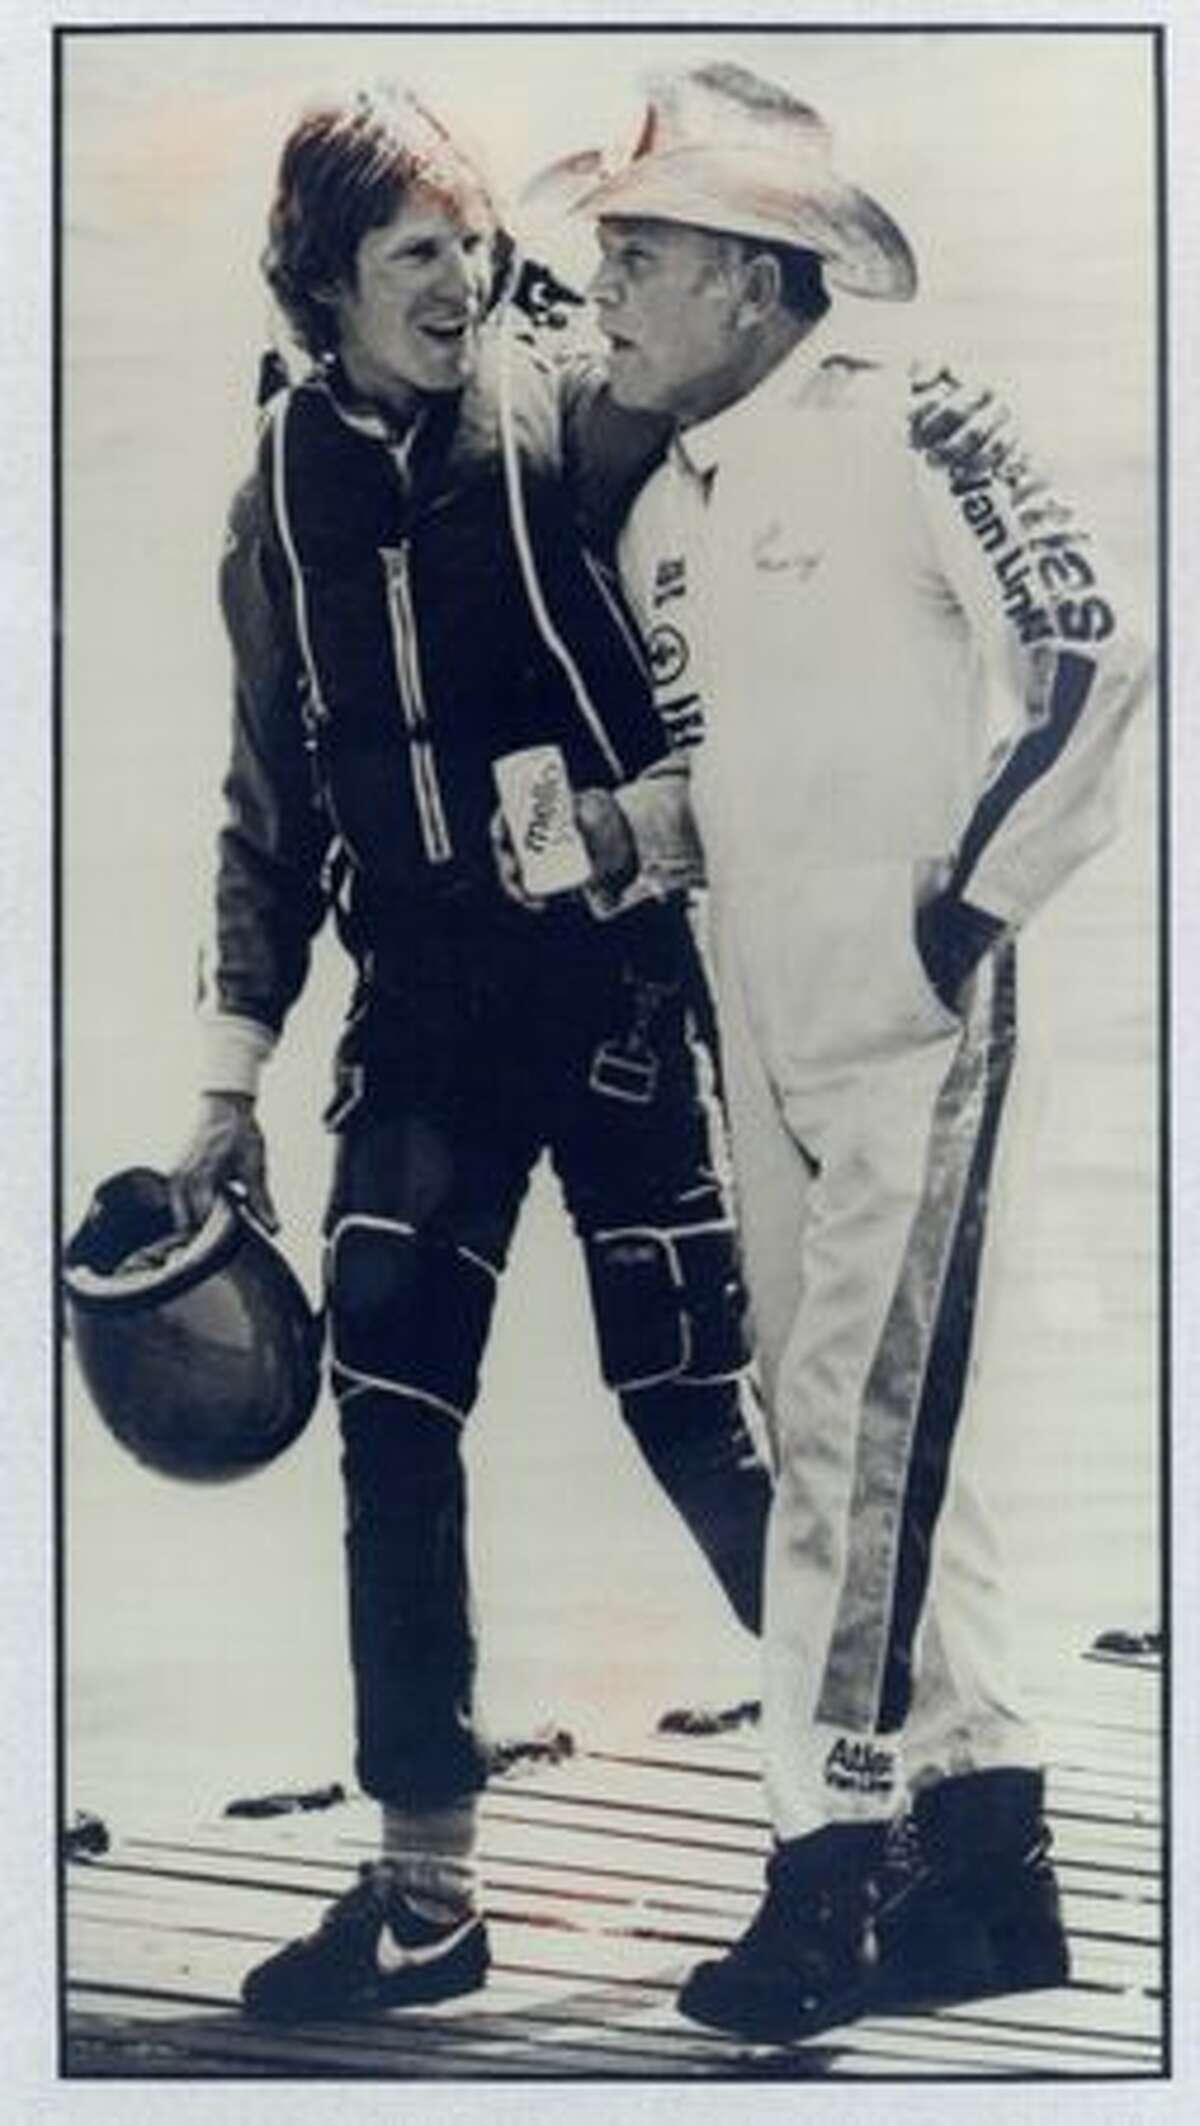 Chip Hanauer, left, and the late Bill Muncey were hydro racing's top drivers until Muncey was killed and Haneaur retired.